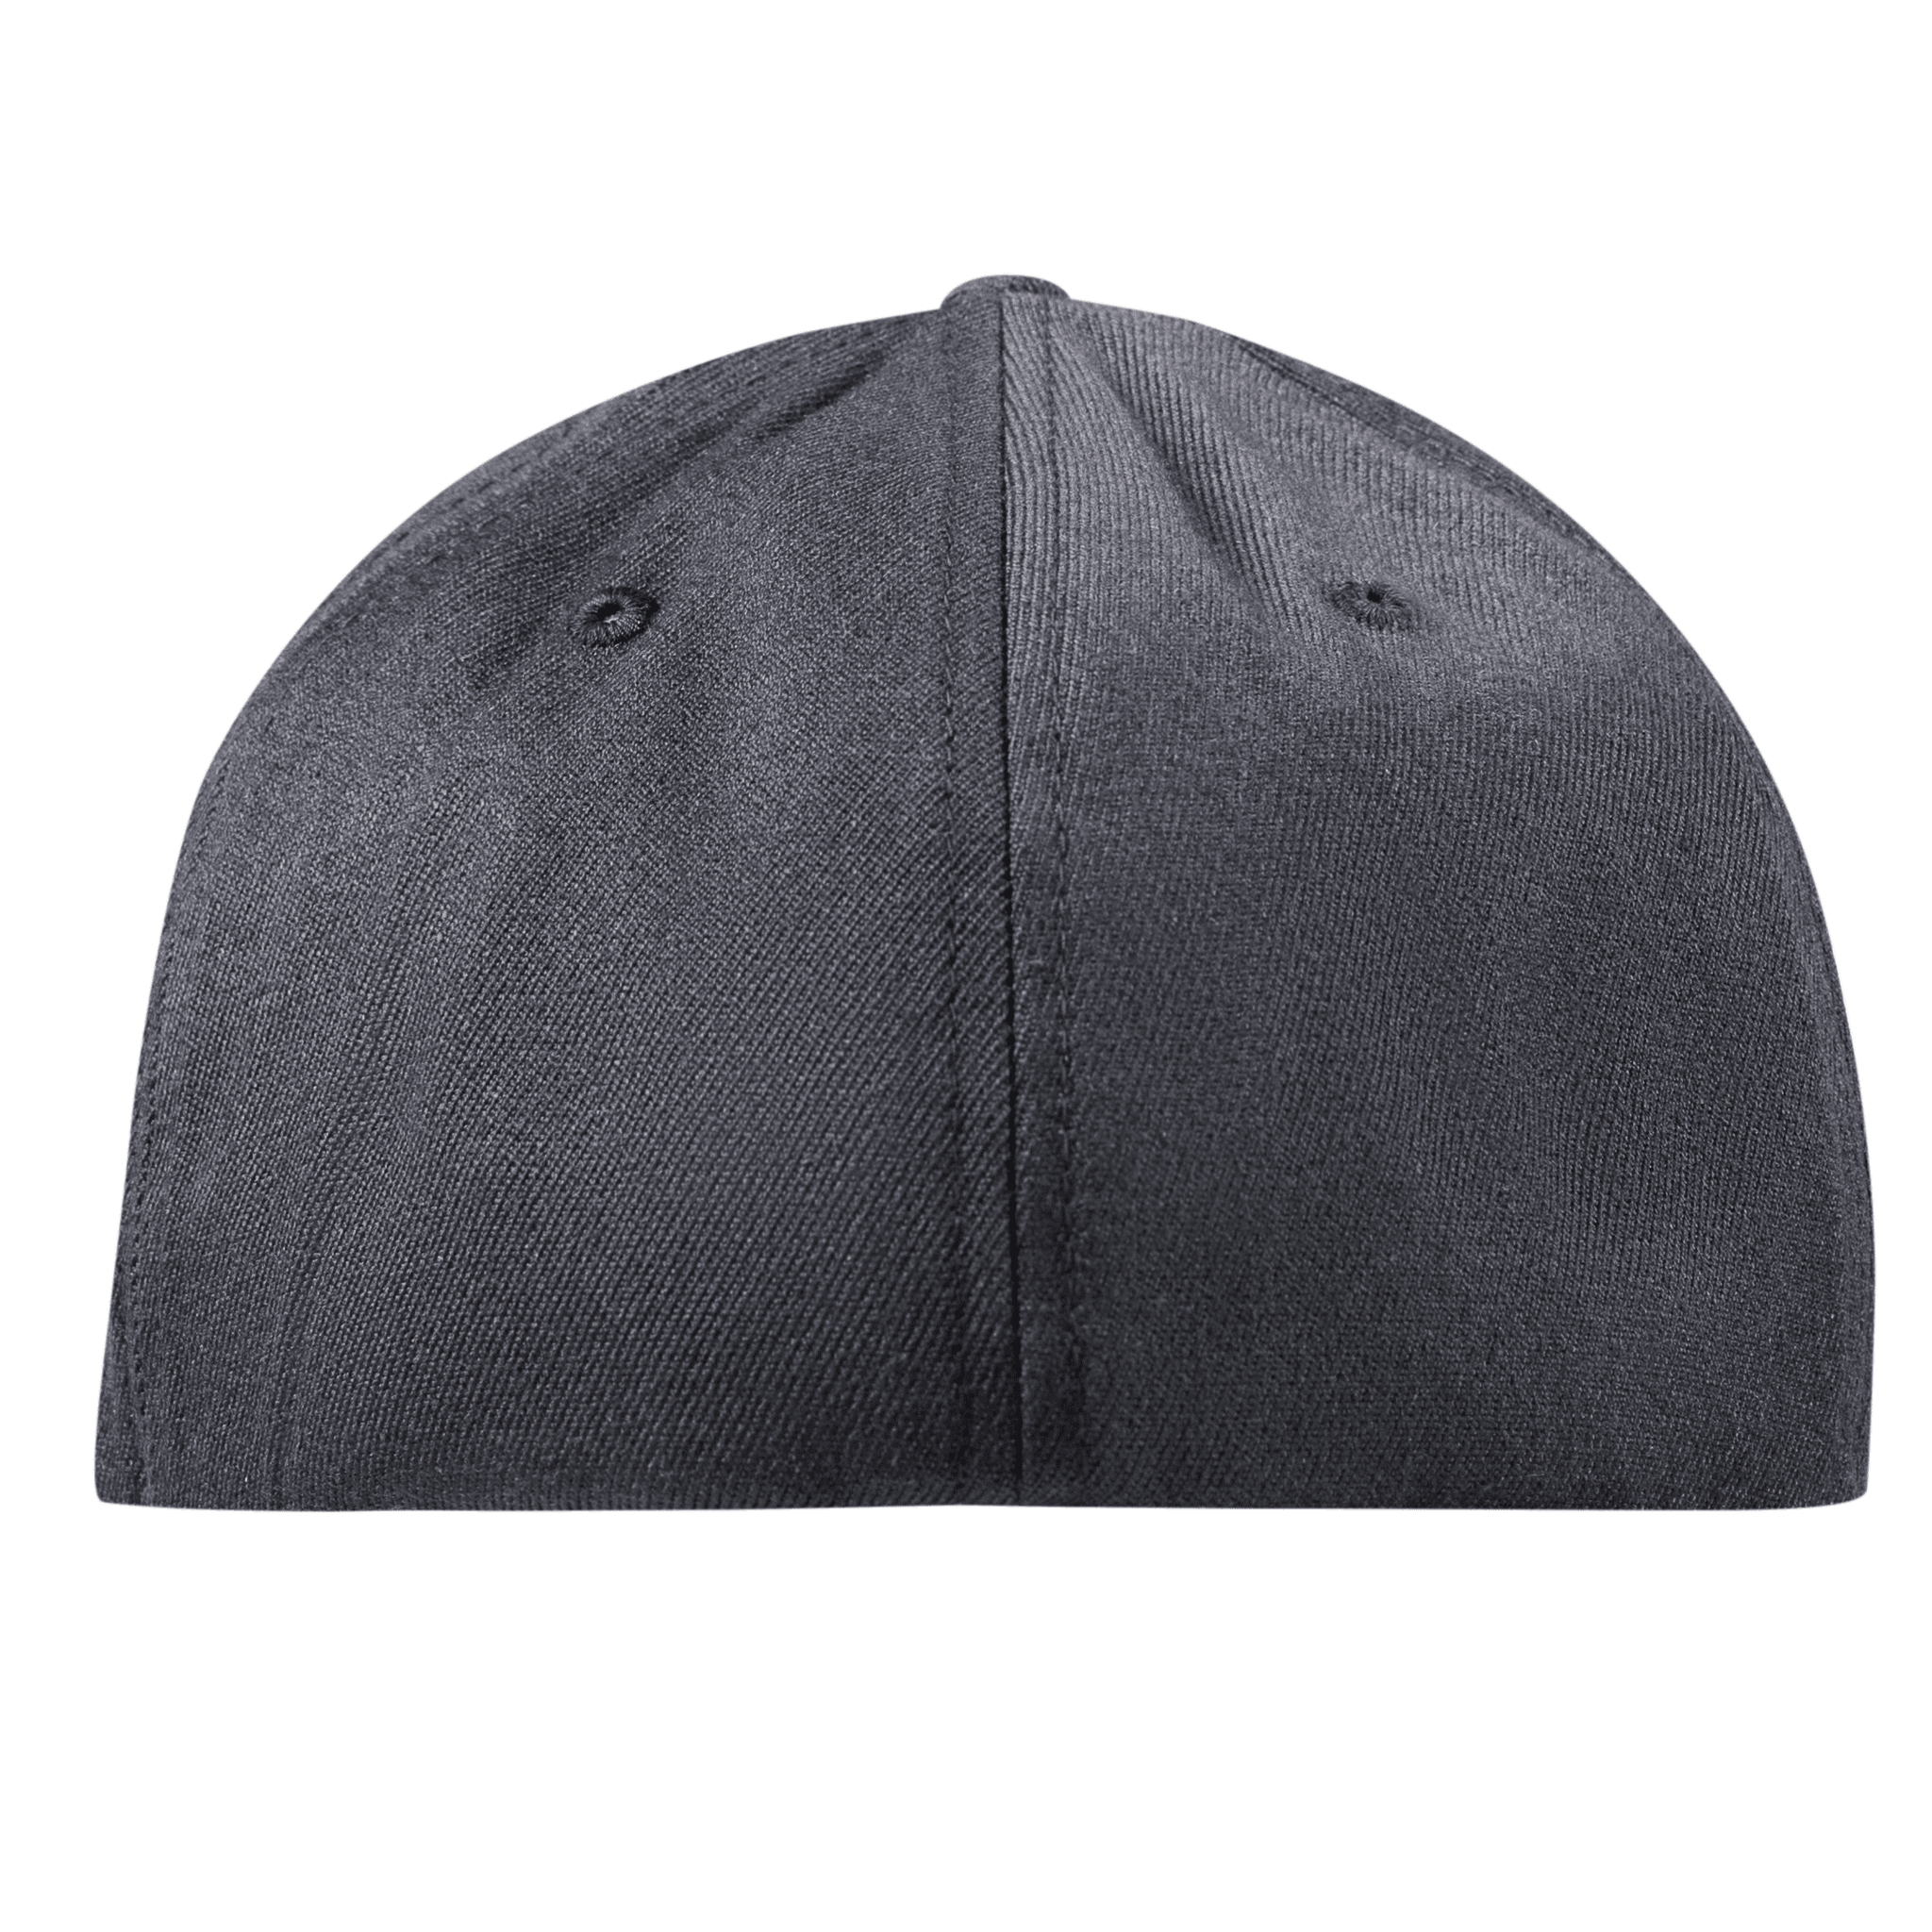 Indiana 19 Midnight Flexfit Fitted Back Charcoal